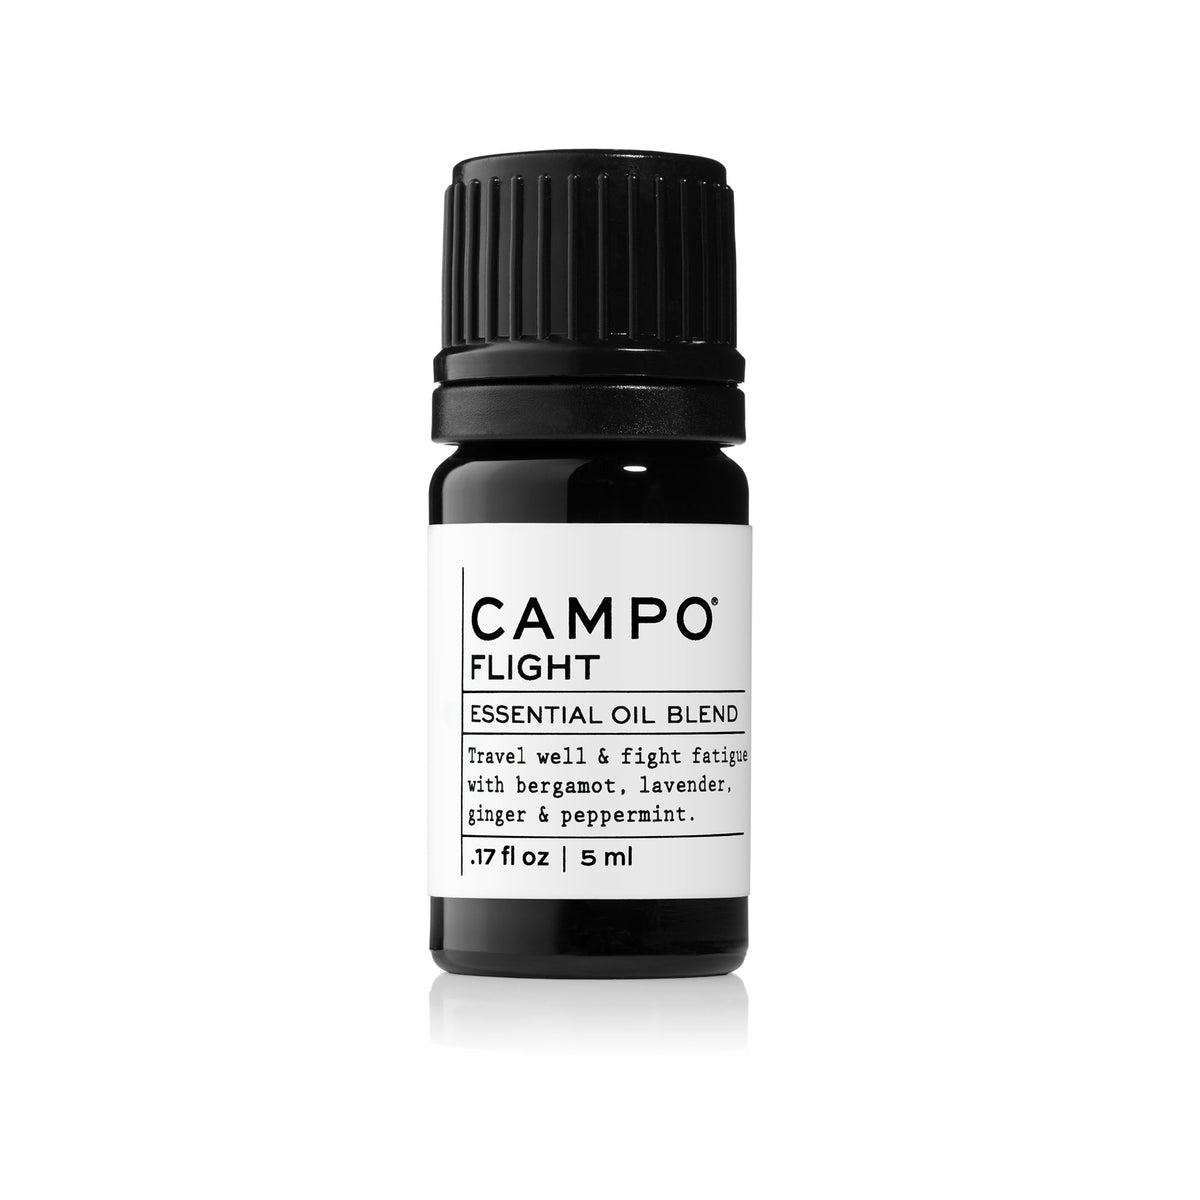 Campo Beauty FLIGHT Blend 5 ml Essential Oil. Dispels feelings of stress during flight and restores a sense of vitality and alertness in any time zone. Feel grounded and connected to your mind and body with this 100% pure essential oil roll-on blend of Bergamot, Lavender, Peppermint &amp; Ginger.